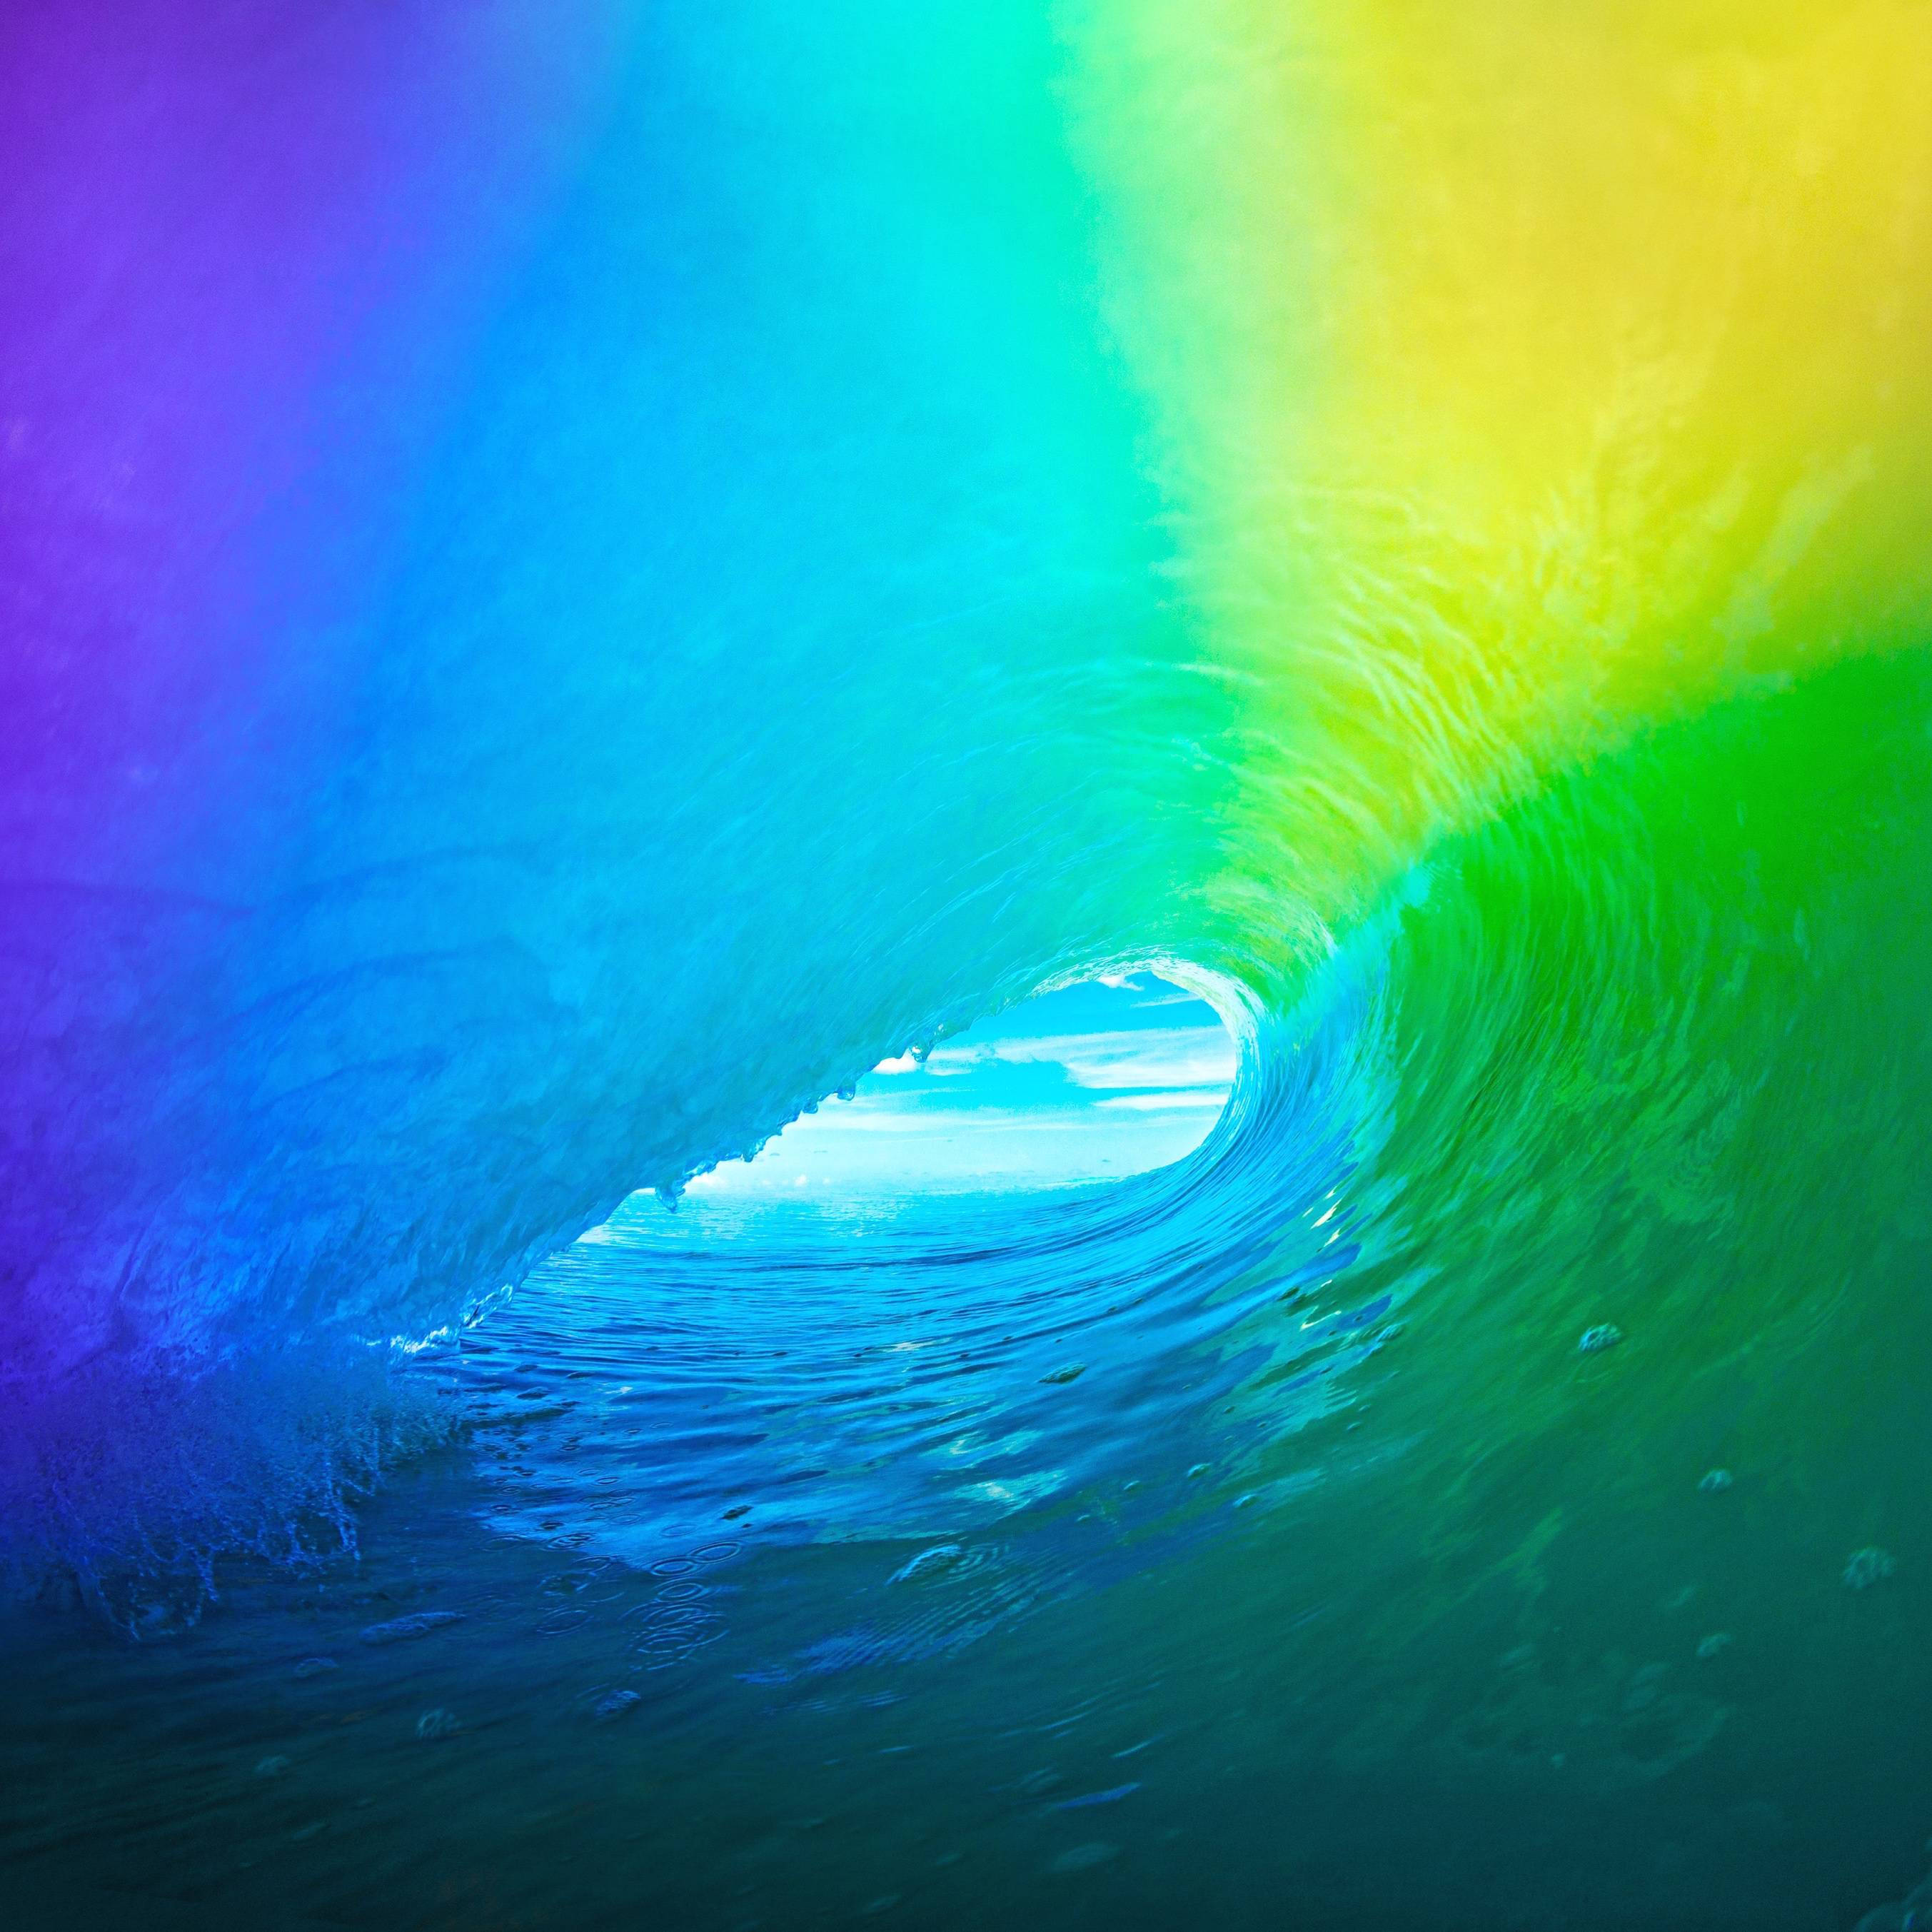 Fascinating Waves As Official Ipad Theme Background